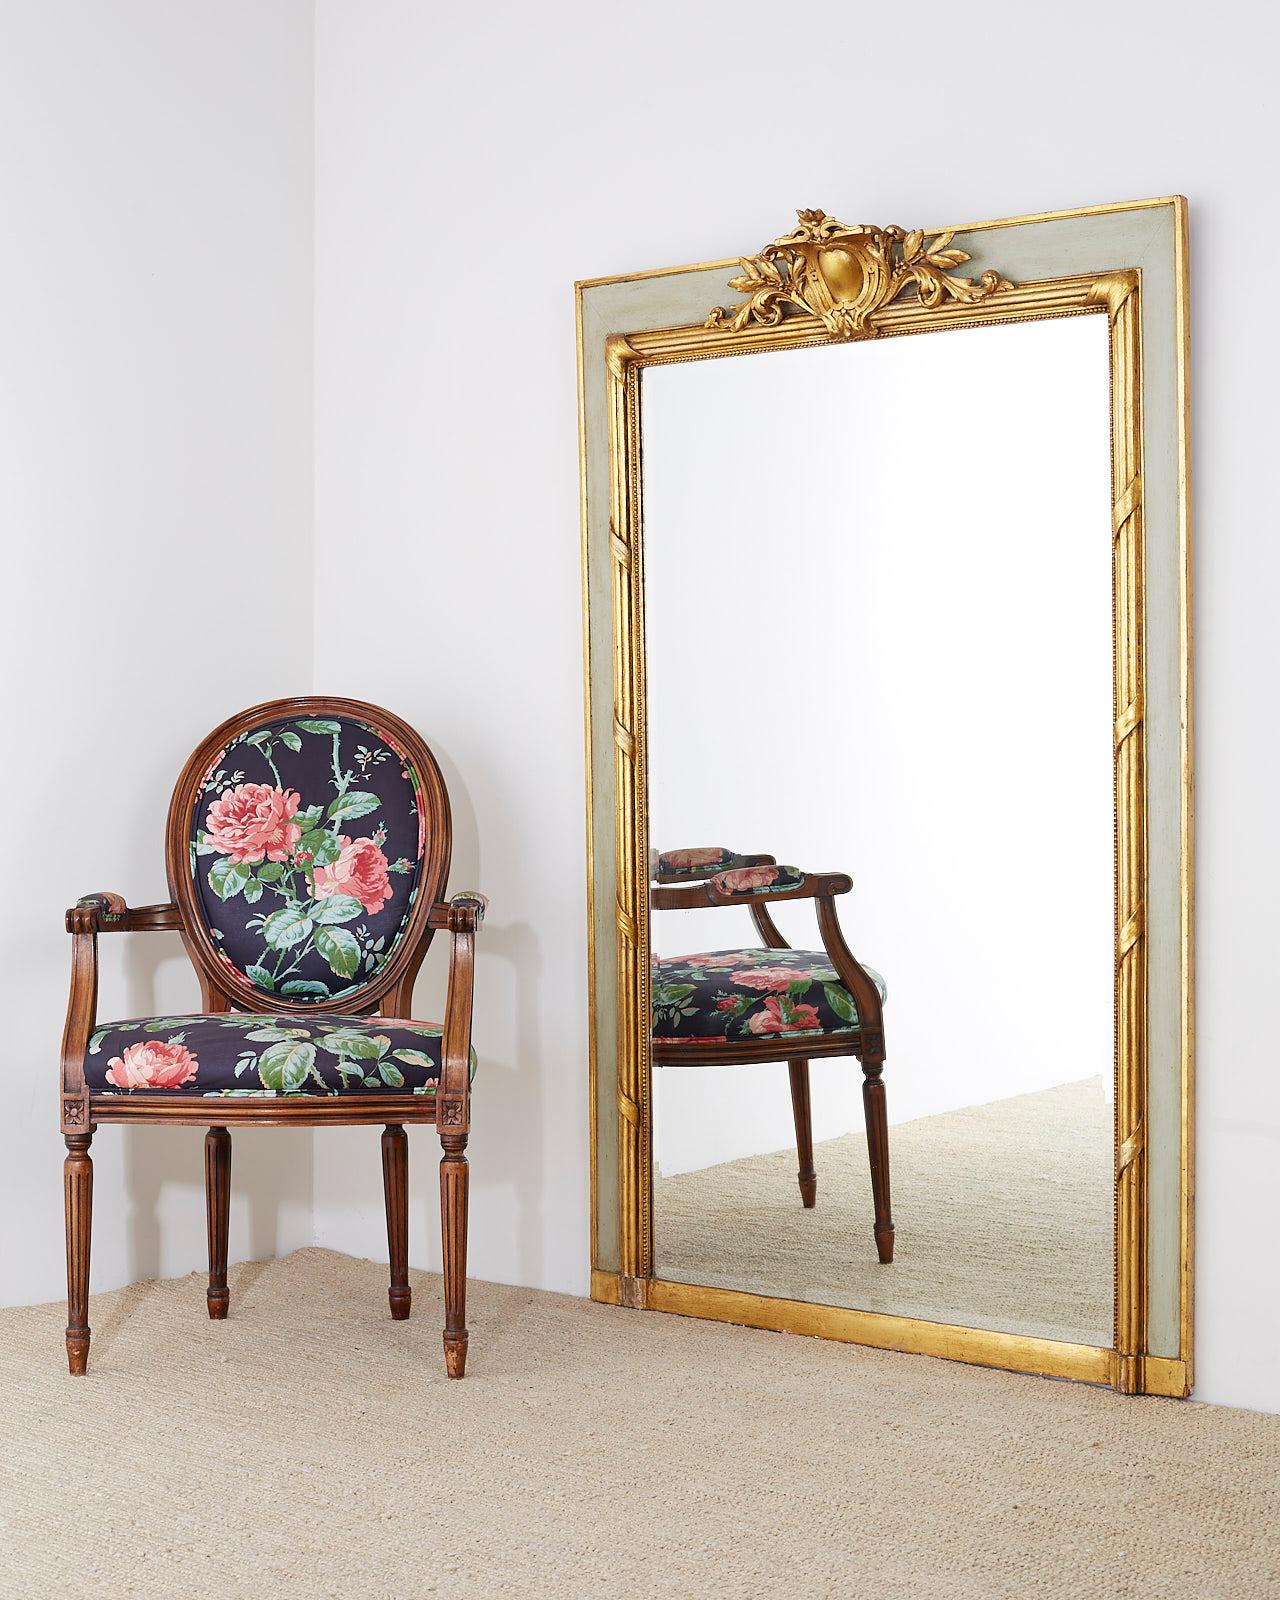 Fantastic French 19th century giltwood trumeau, pier glass, console, or wall mirror. Made in the Louis XVI neoclassical taste featuring a carved armorial decorative top over the large beveled plate glass. The mirror has a wide frame with the inner